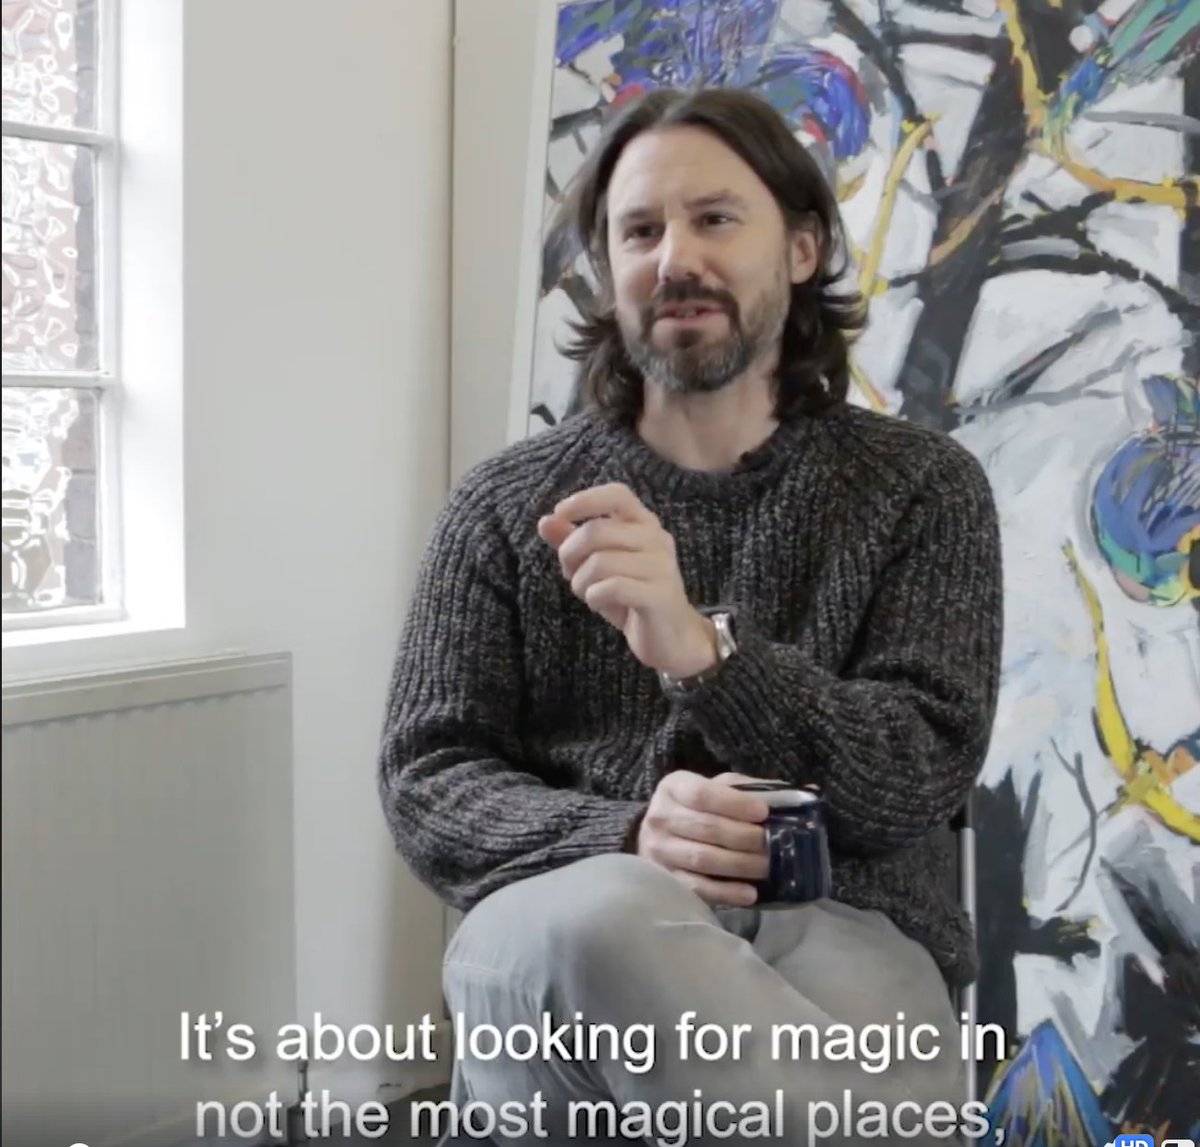 This little film was made by @CreativeBCuk for their @100Masters programme. The idea of me sharing tips is a bit laughable really! facebook.com/OneHundredMast…